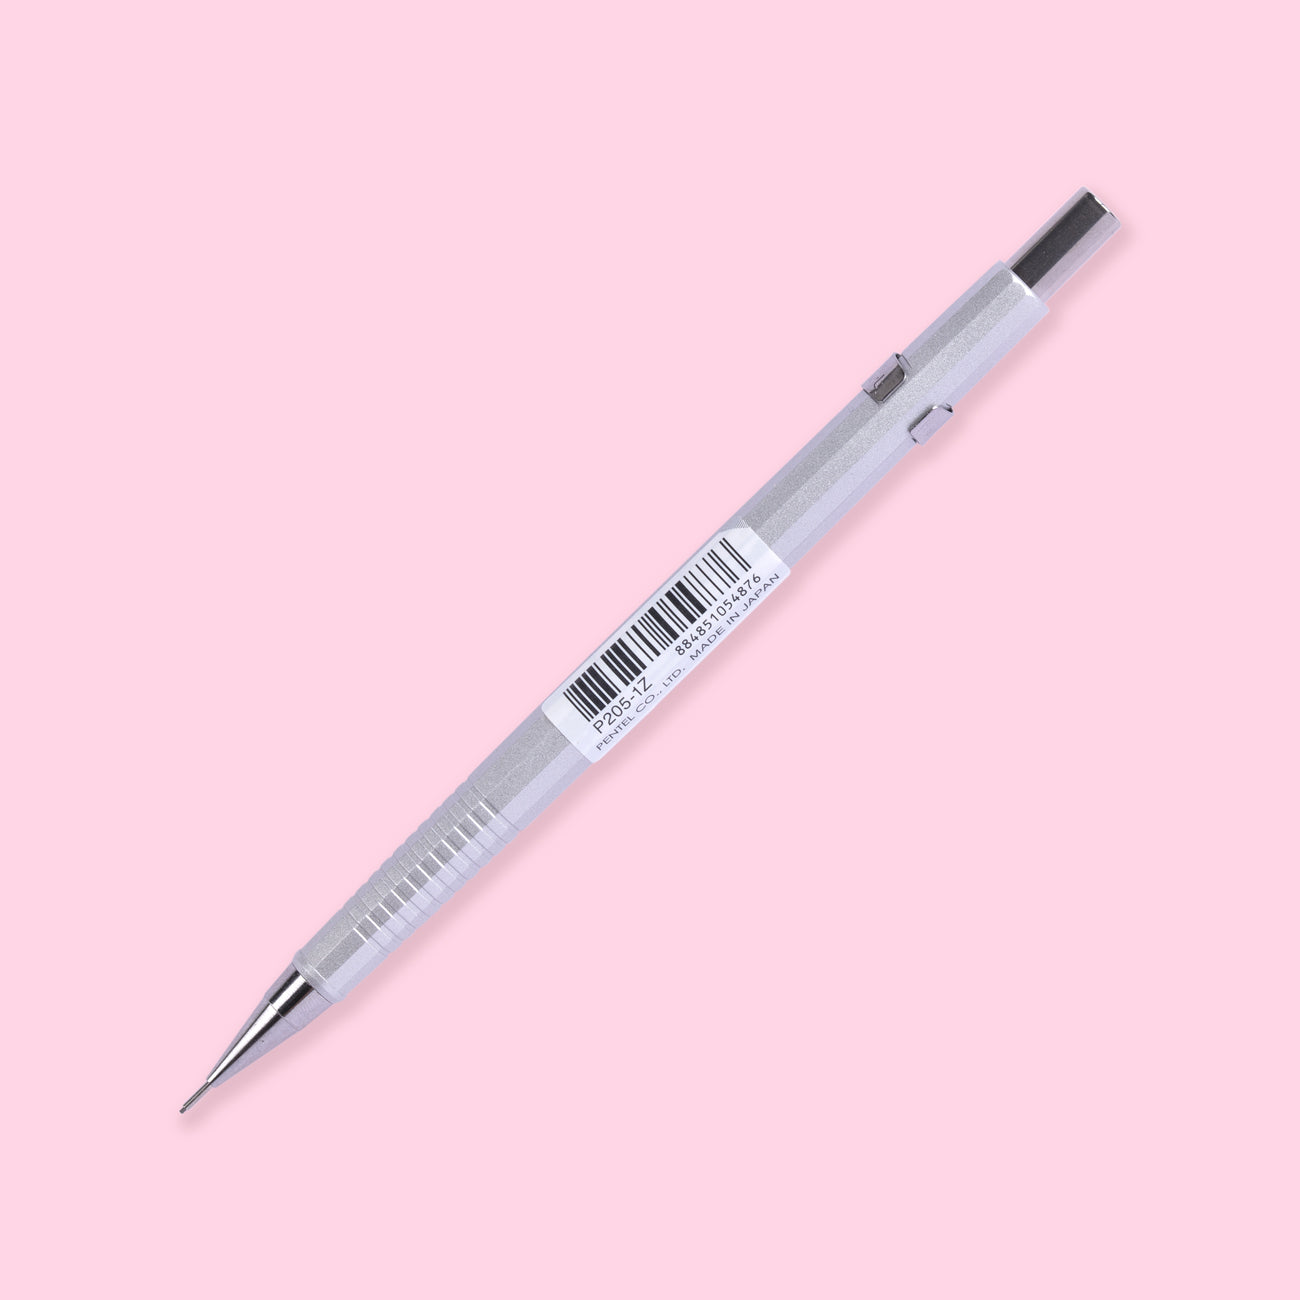 Pentel Limited Edition P205 Mechanical Pencil - 0.5 mm - Silver